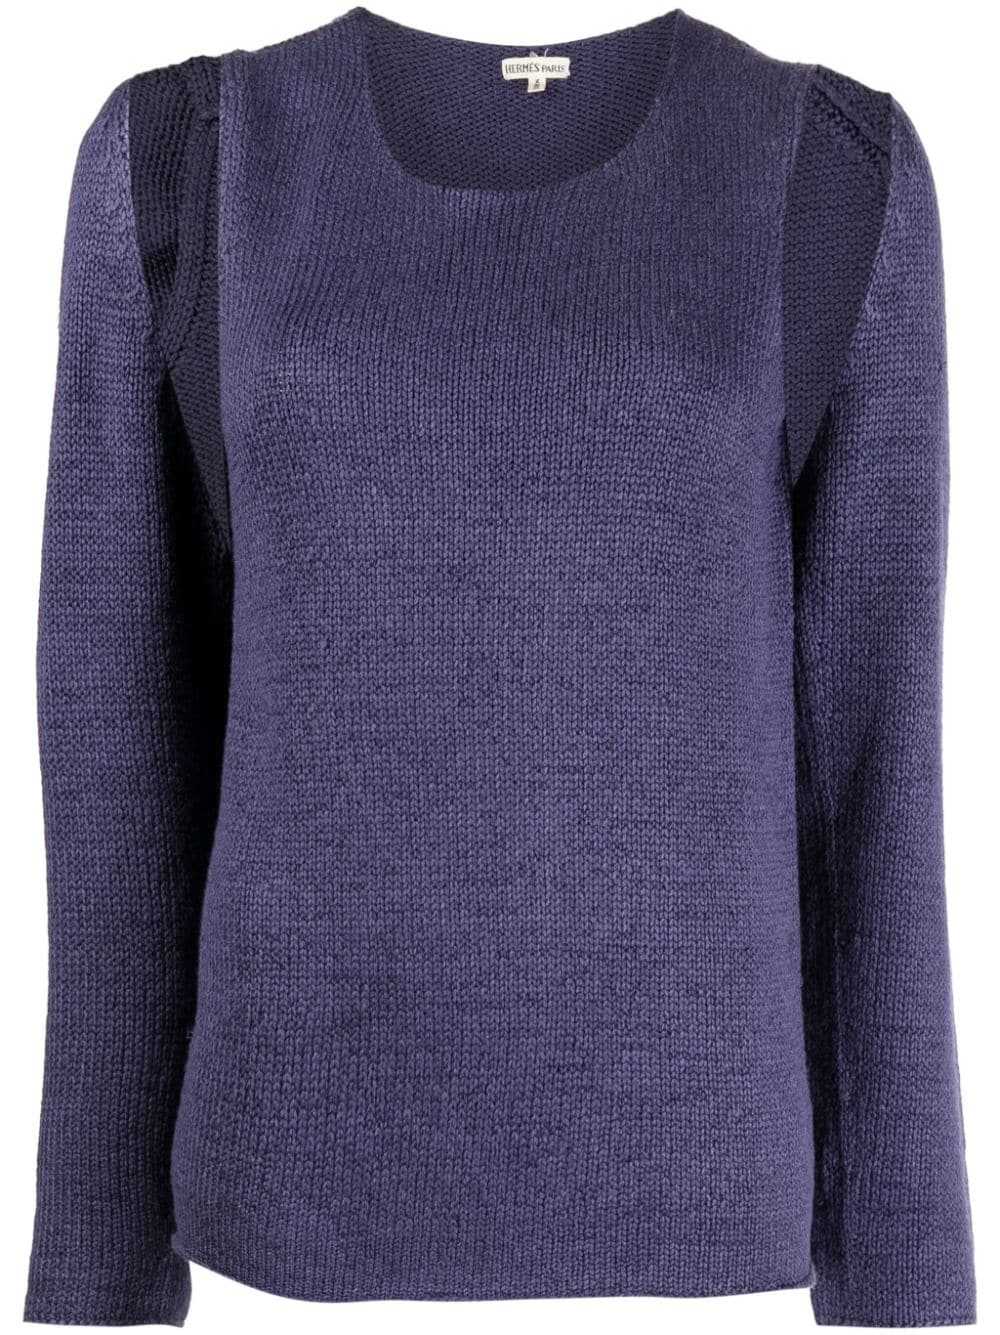 Hermès Pre-Owned 1990-2000s two-piece knit top - … - image 1